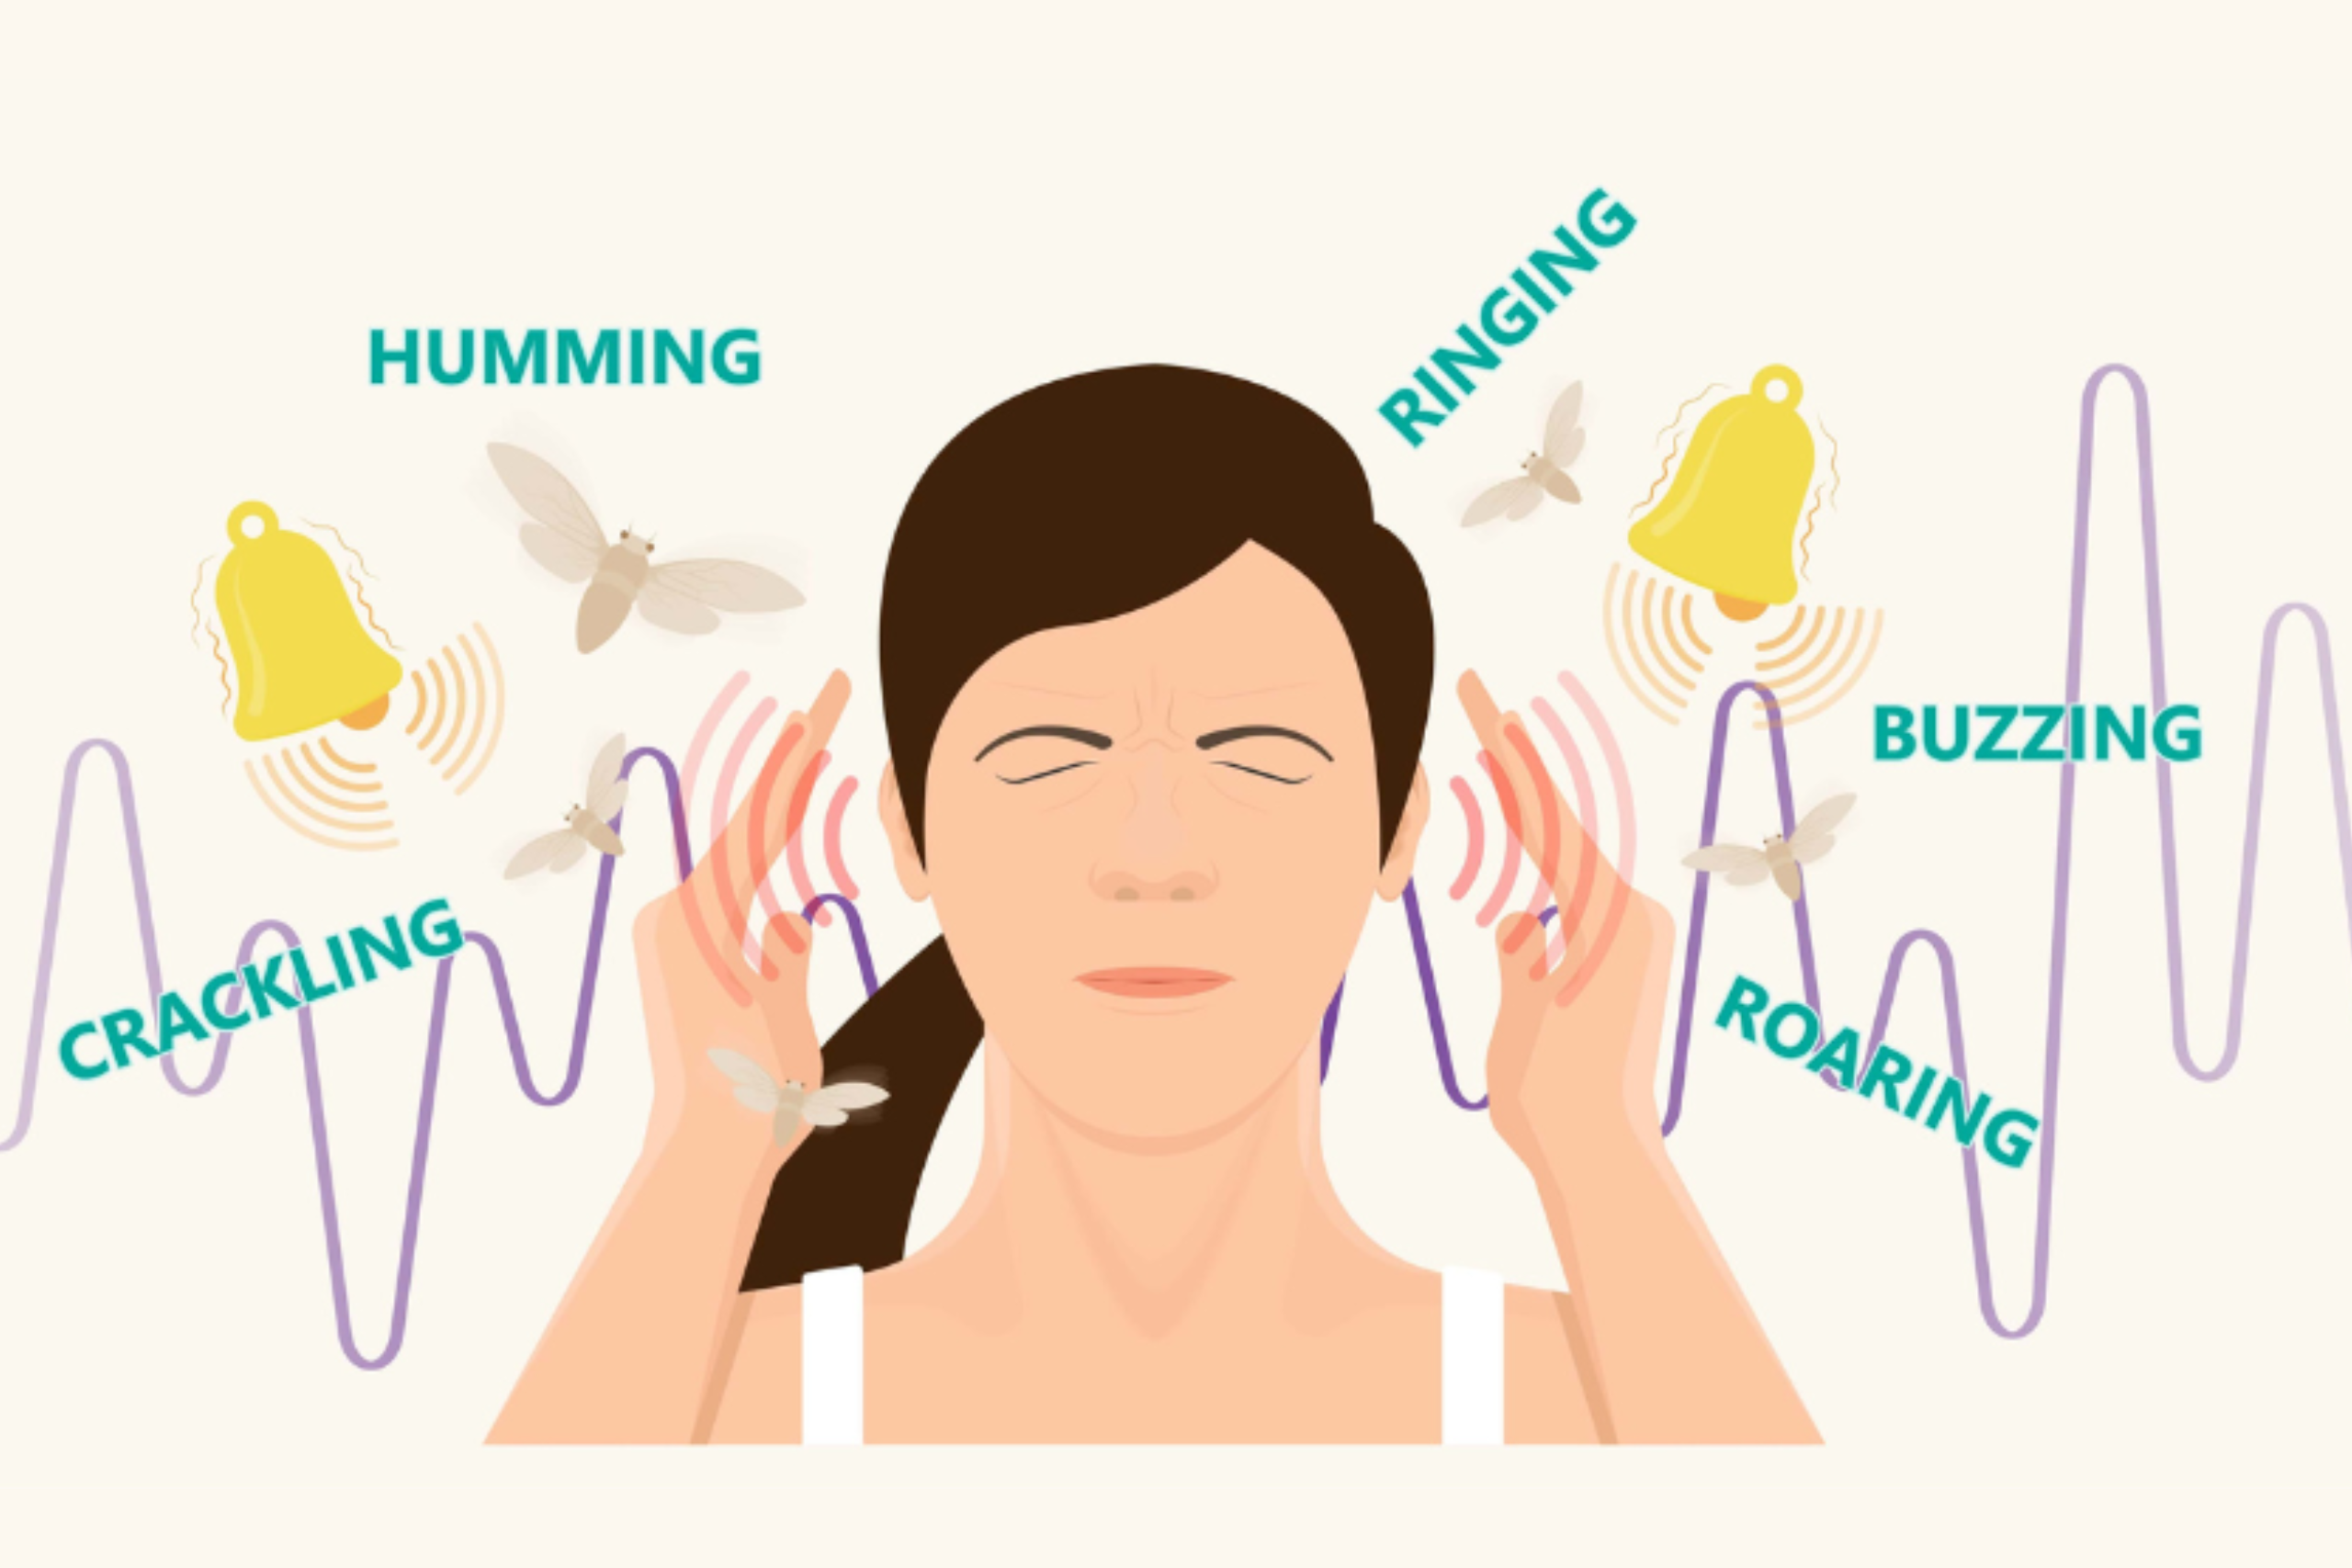 tinnitus care - the hearing specialist